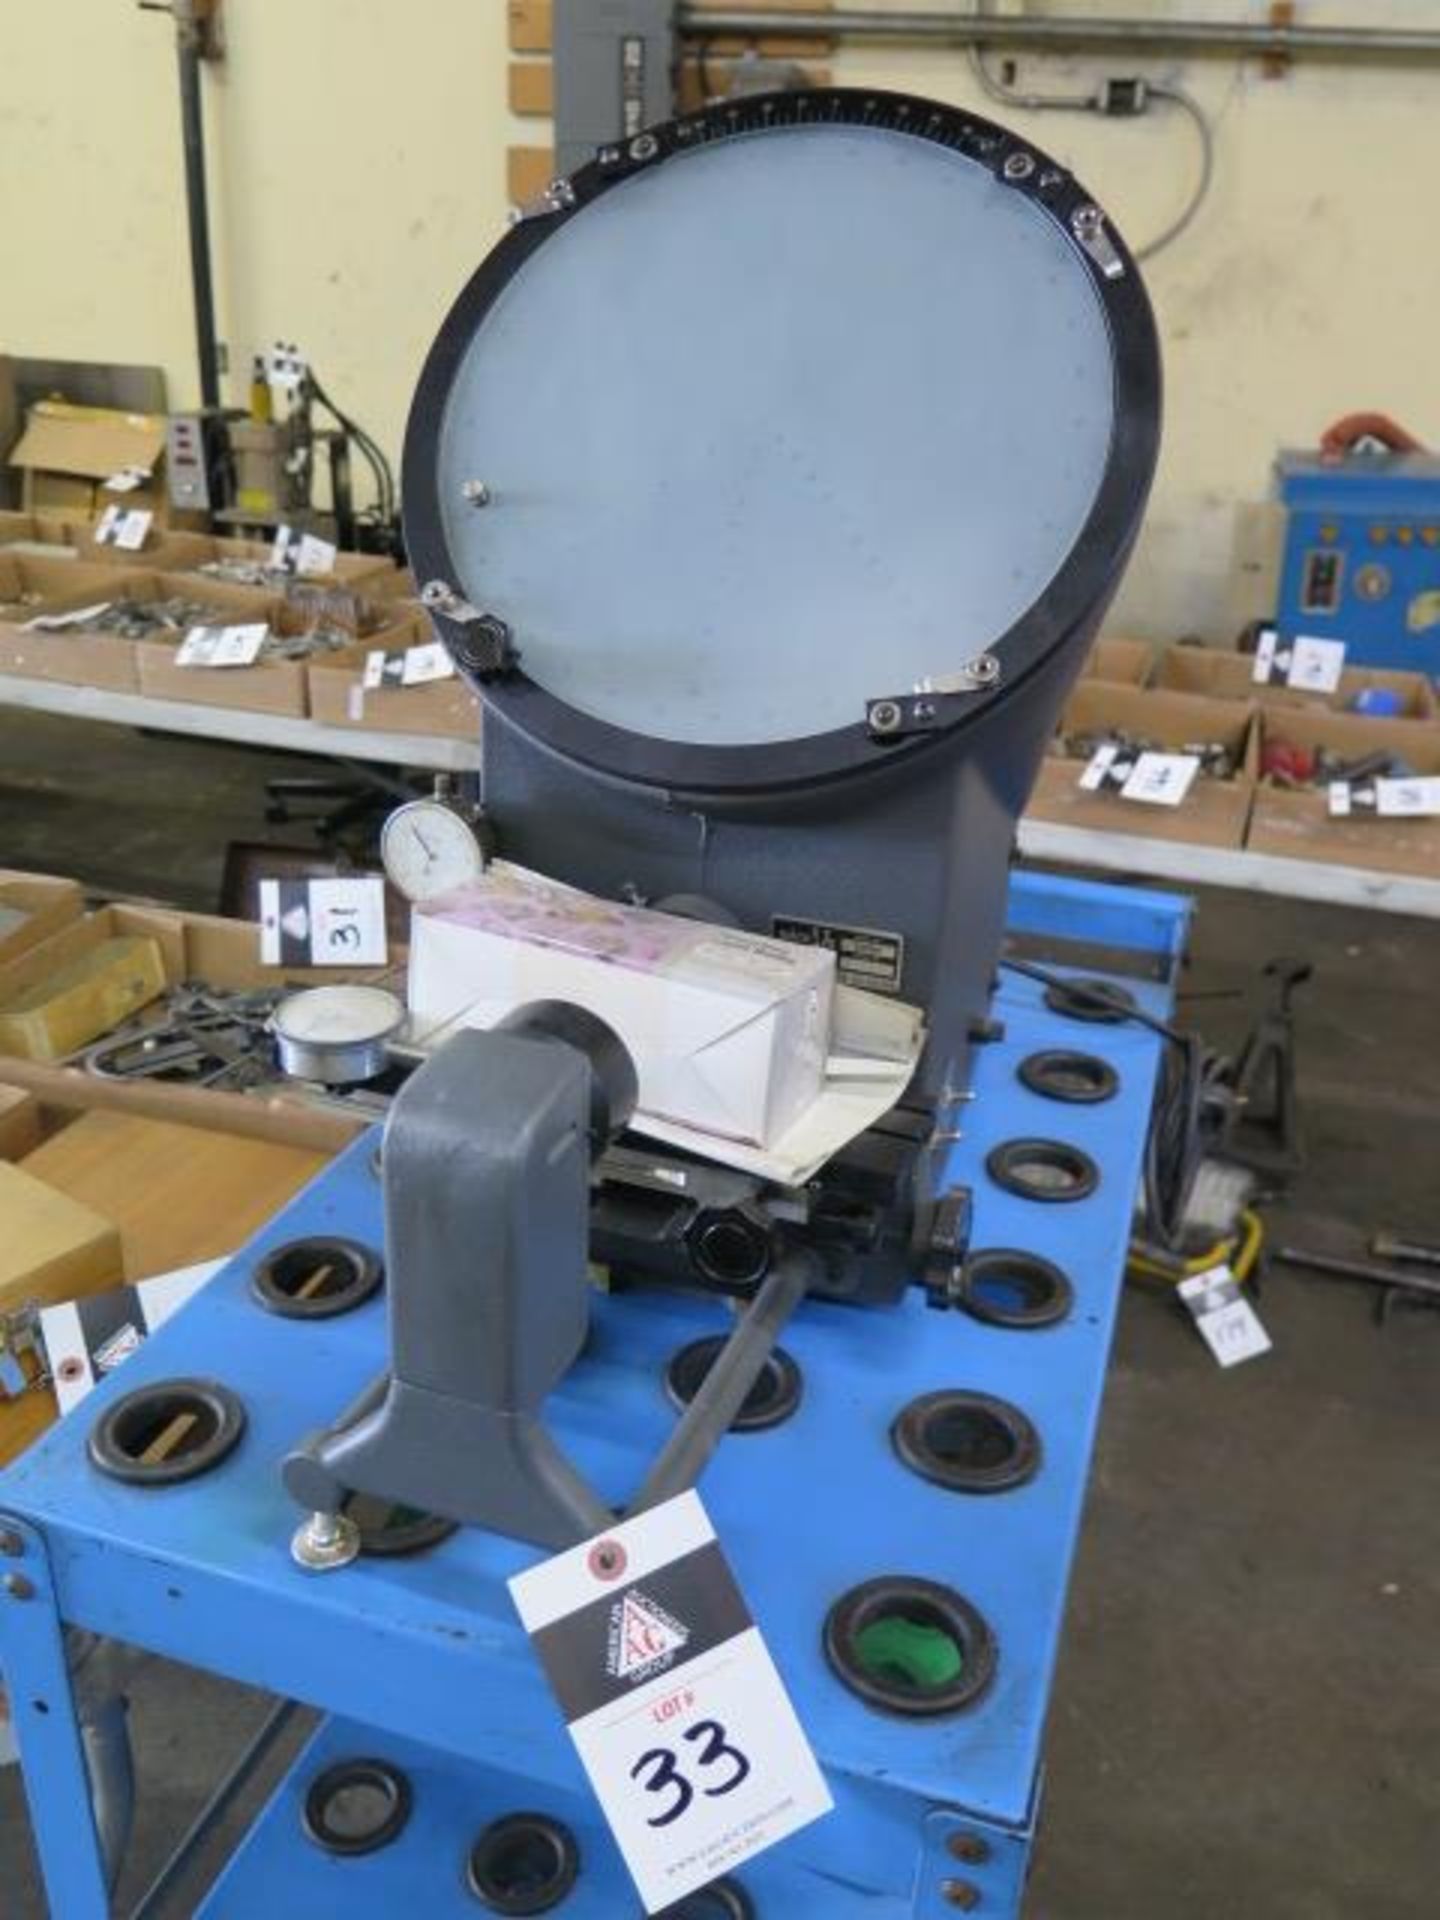 MicroVu mdl. 500HP 12” Table Model Optical Comparator s/n 25521 (SOLD AS-IS - NO WARRANTY)